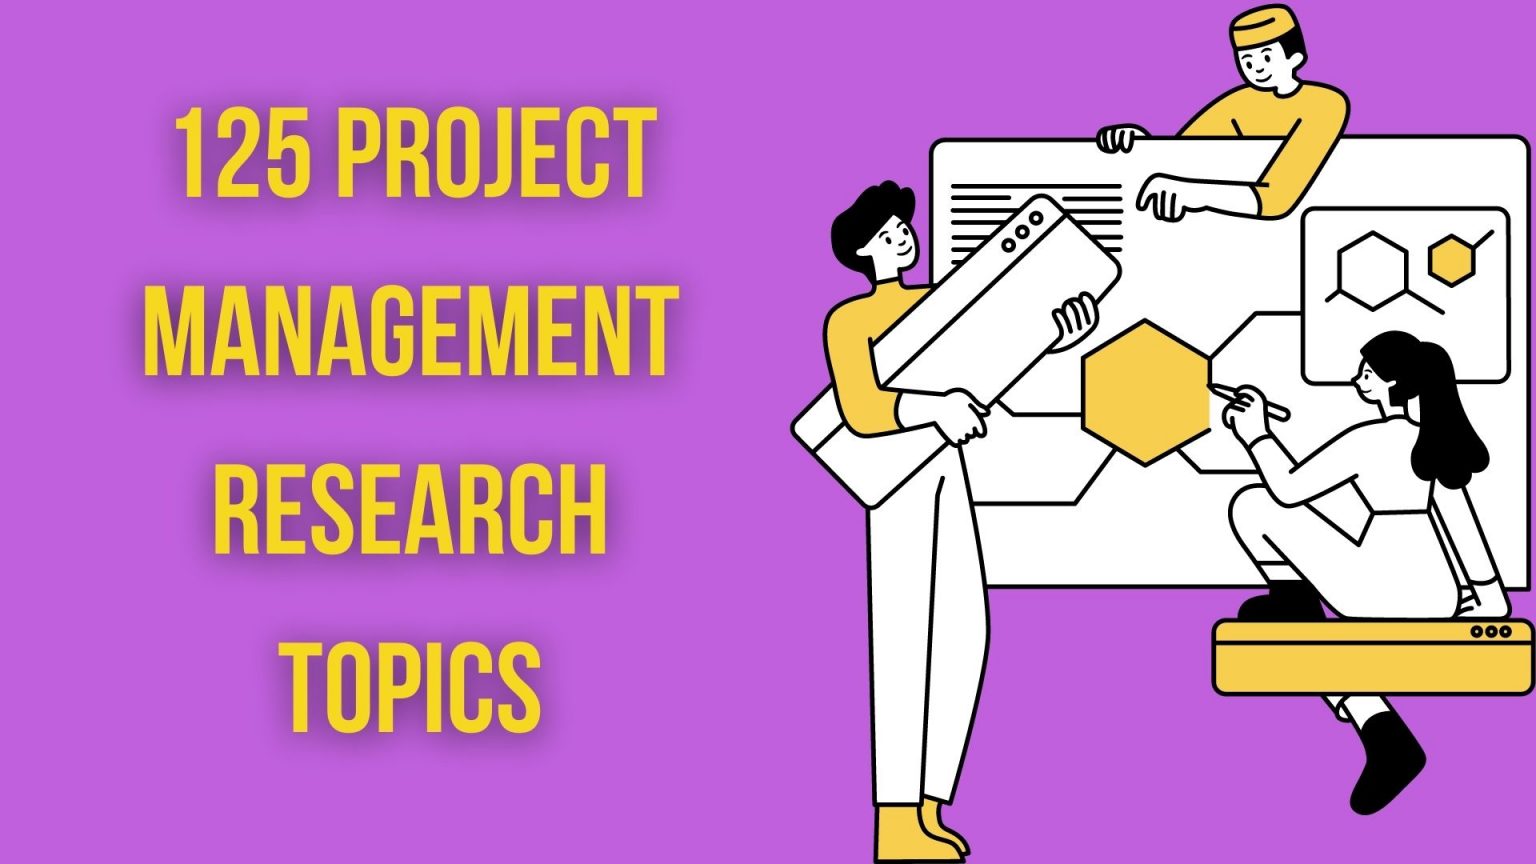 research project topics on project management